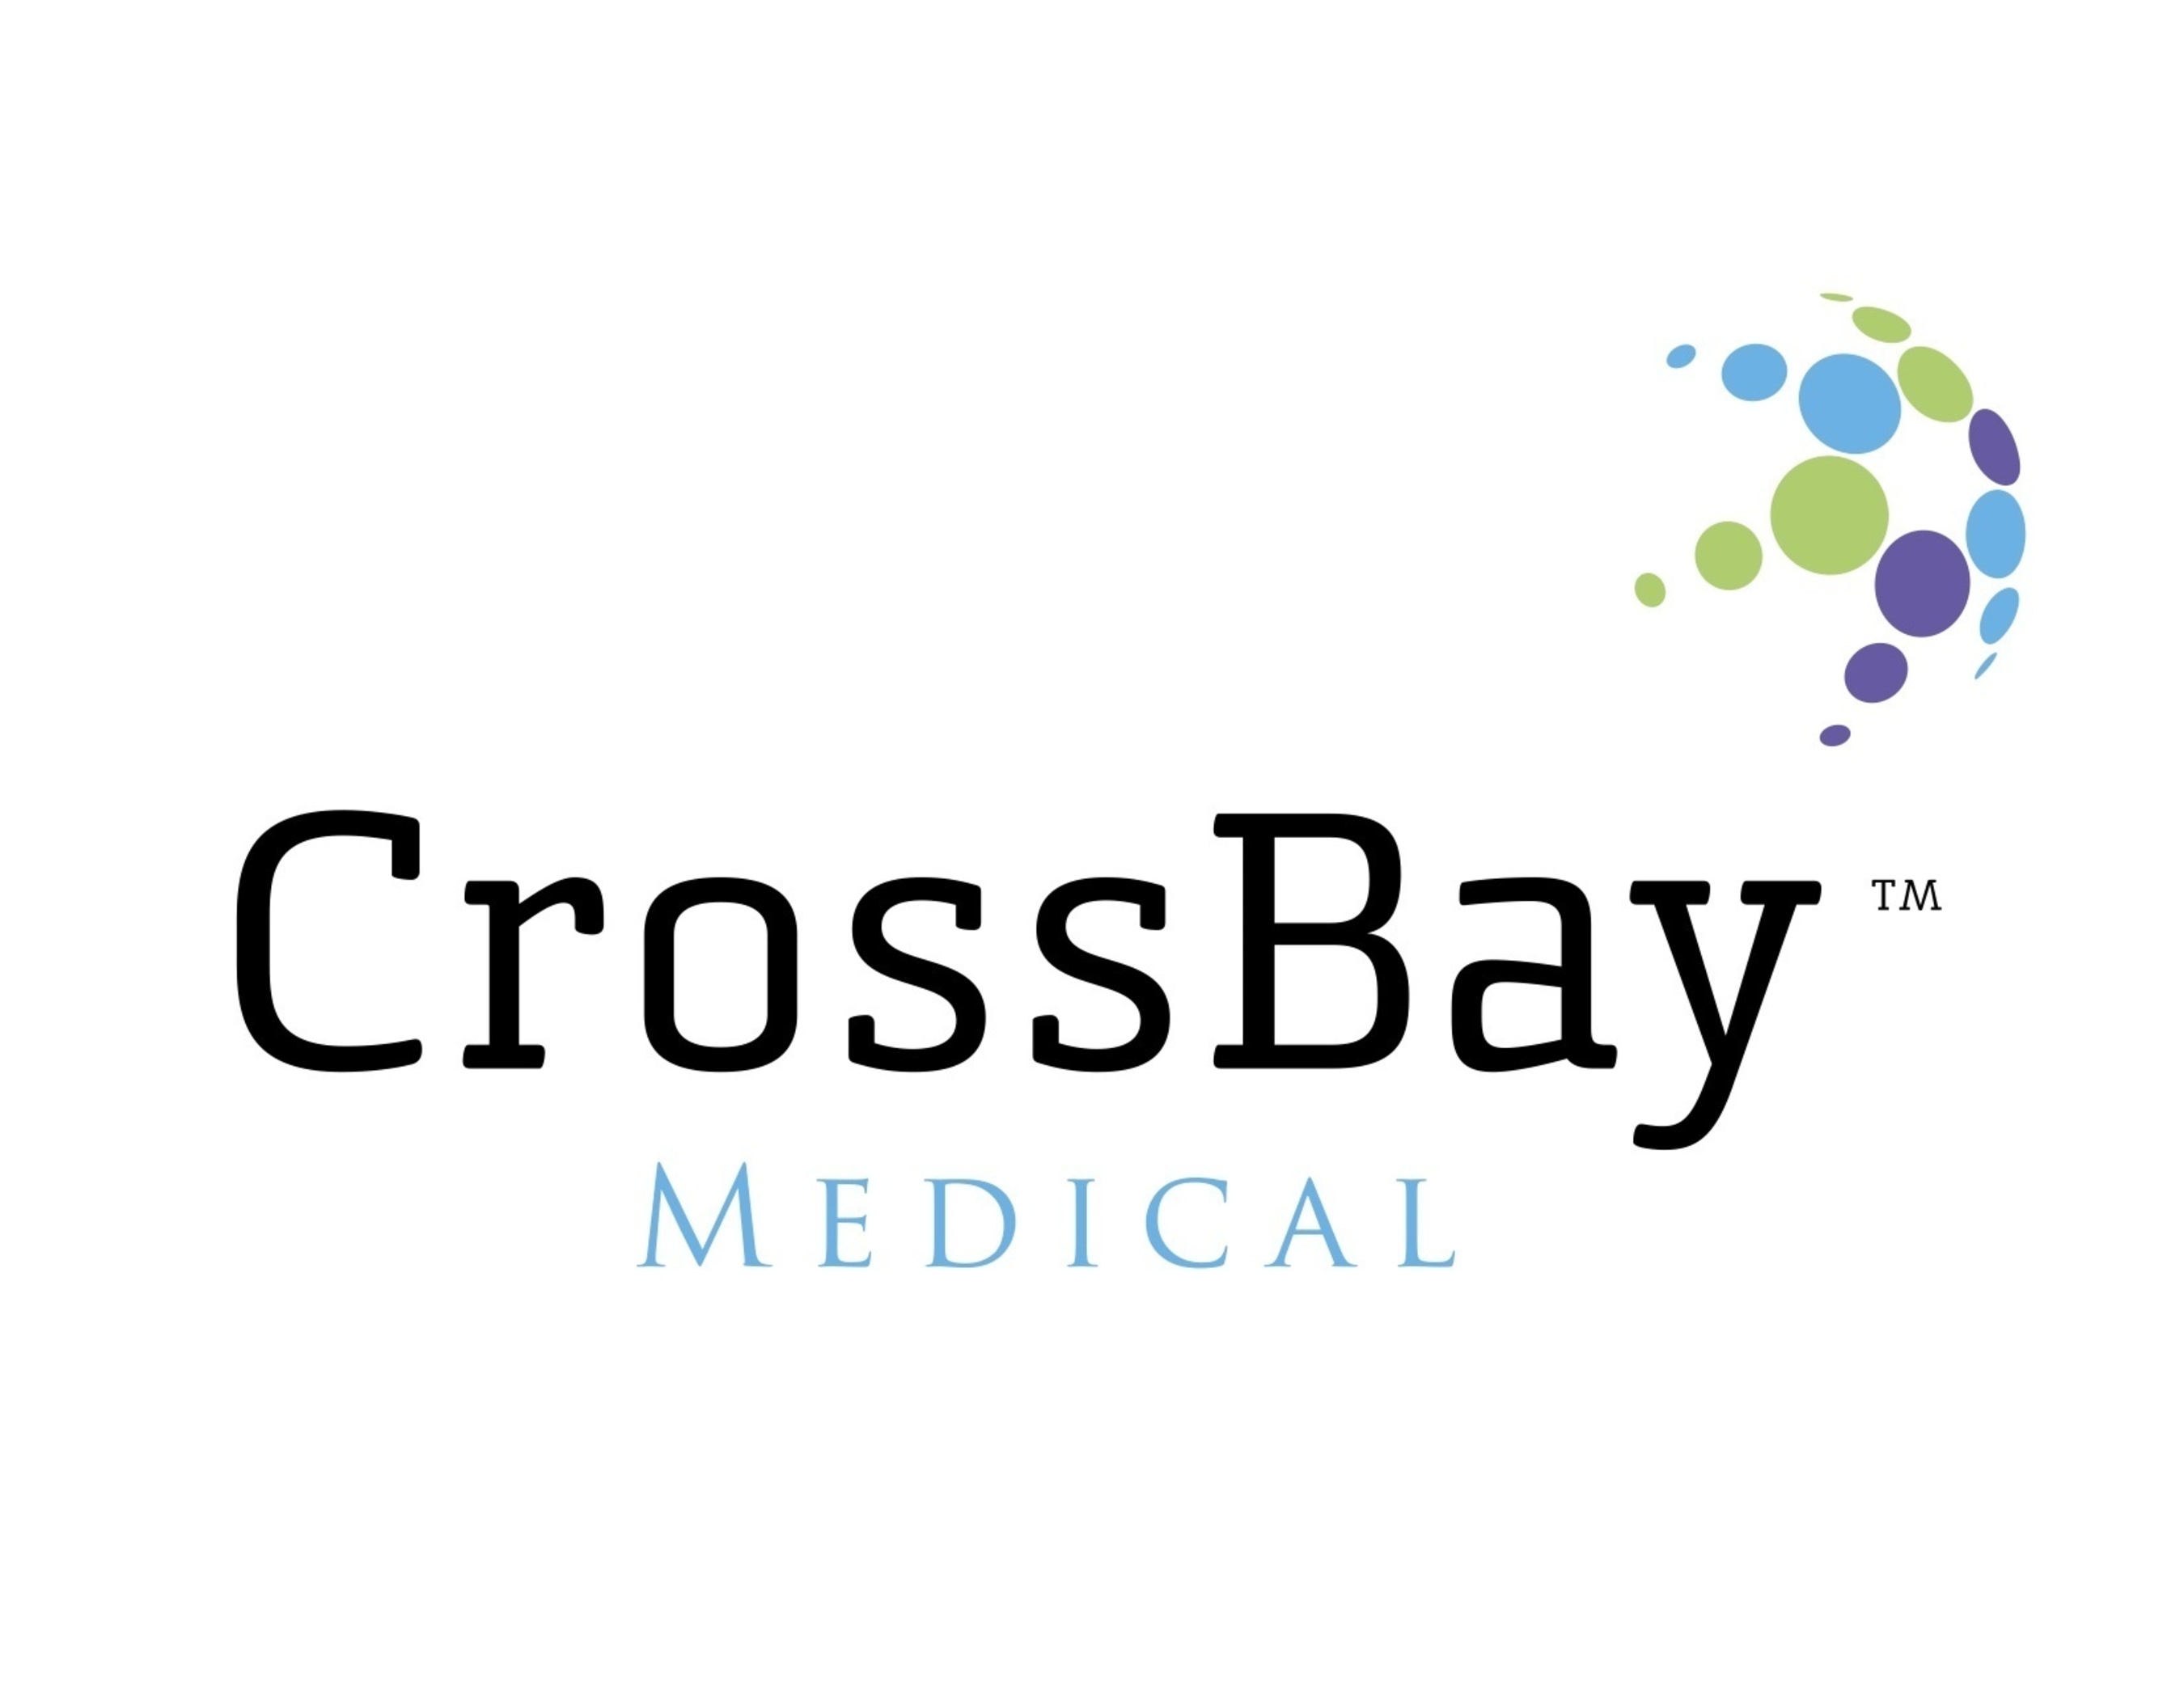 CrossBay Medical, Inc. was founded in 2009 with the goal of providing affordable healthcare products for women and children.  The strategic partners in the company have developed, manufactured, registered and commercialized products for a combined 60 years. CrossBay Medical's products are designed in the United States, manufactured in China, and distributed by an existing network of affiliates.  (PRNewsFoto/Norgenix Pharmaceuticals, LLC)